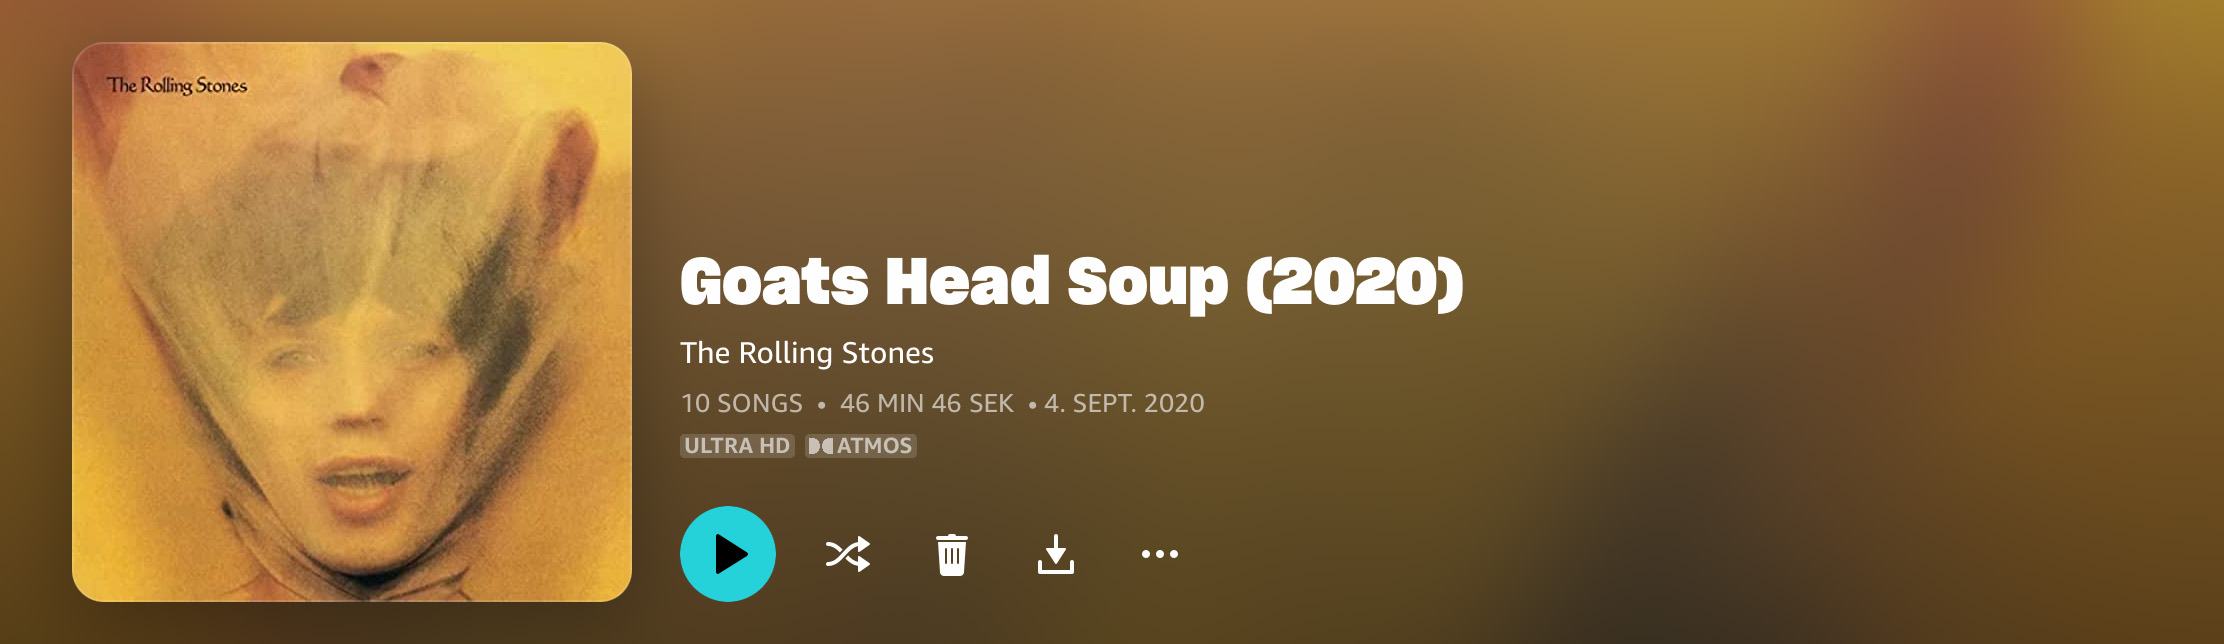 Rolling Stones - Gotas Head Soup Dolby Atmos